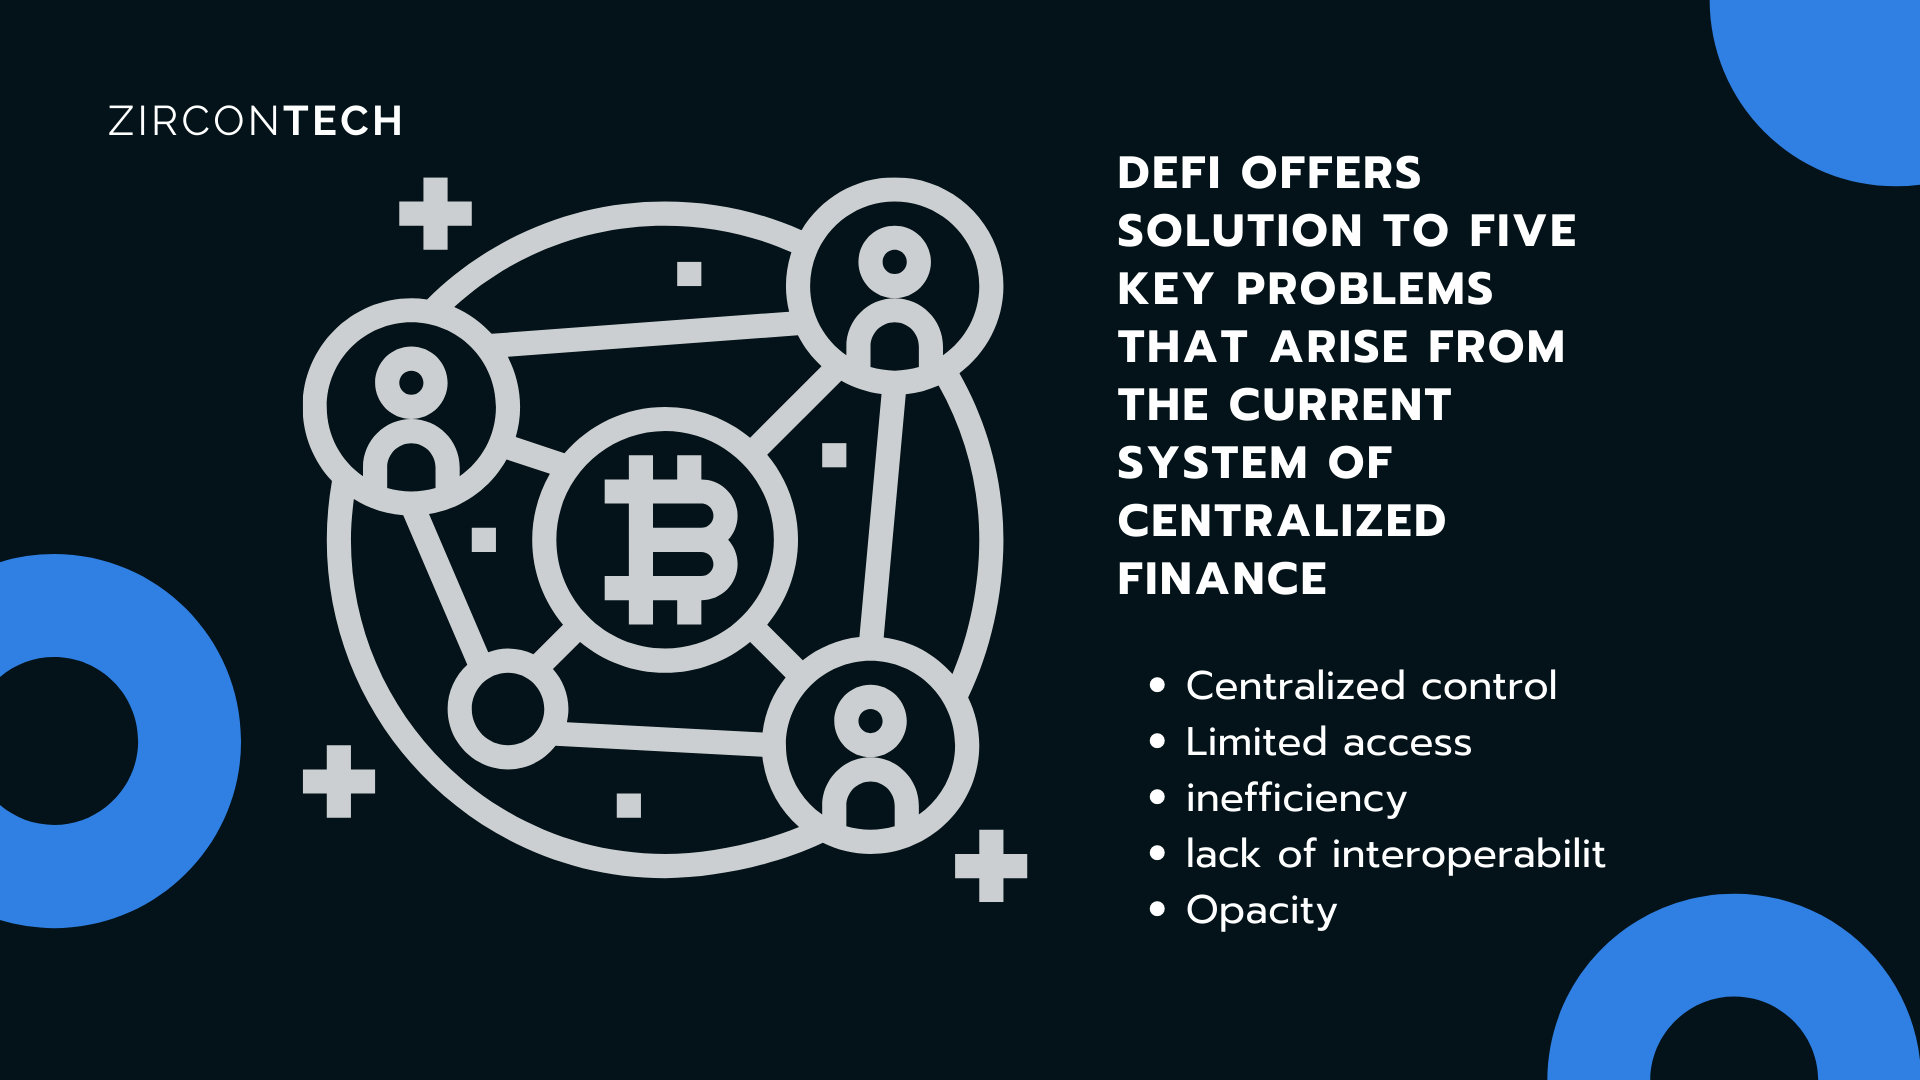 DeFi as the solution for key problems of centraliced finance such as centralized control, limited access, inefficiency, lack of interoperabilit, opacity